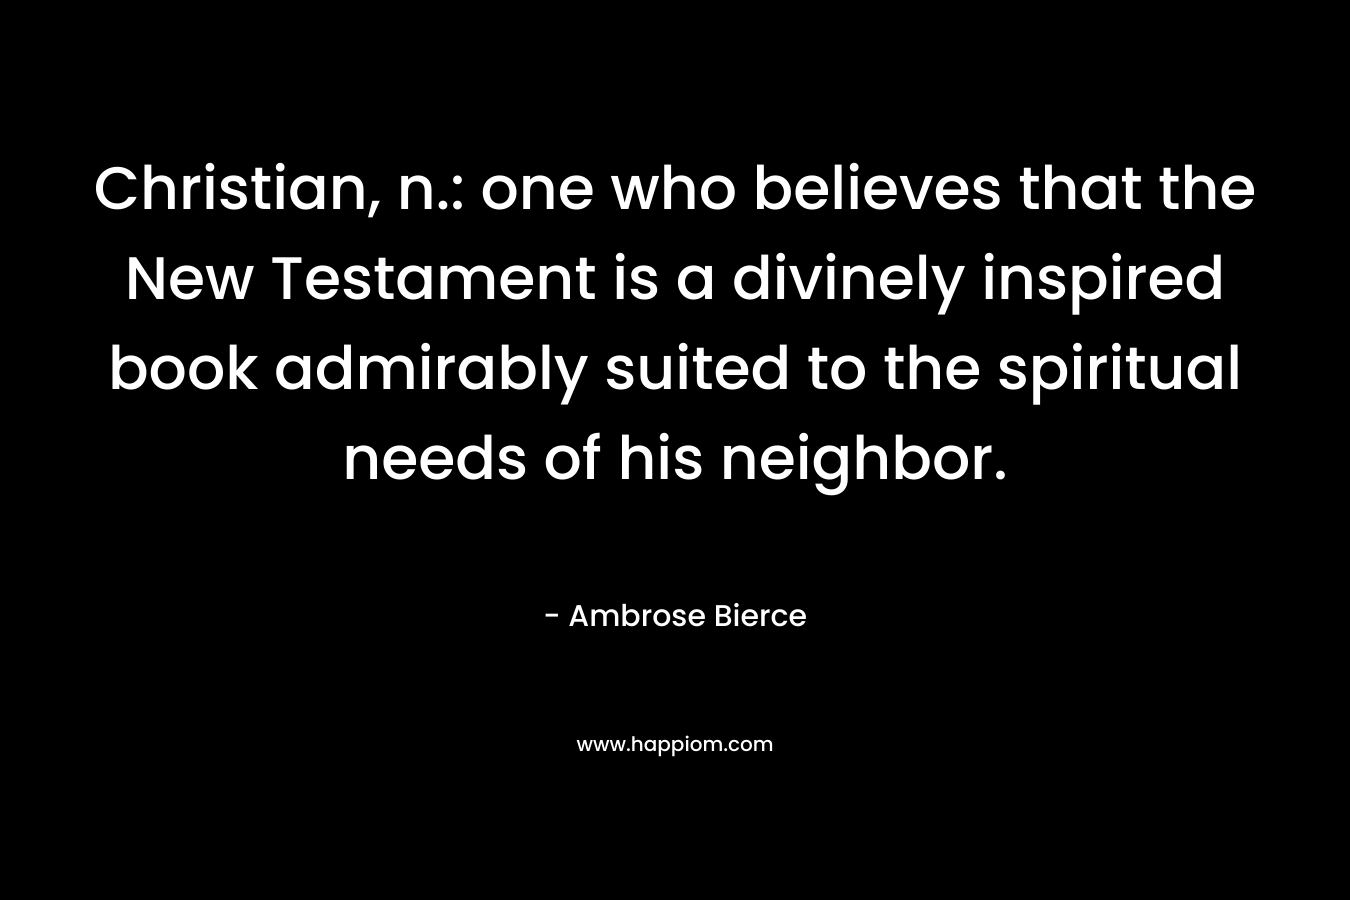 Christian, n.: one who believes that the New Testament is a divinely inspired book admirably suited to the spiritual needs of his neighbor. – Ambrose Bierce